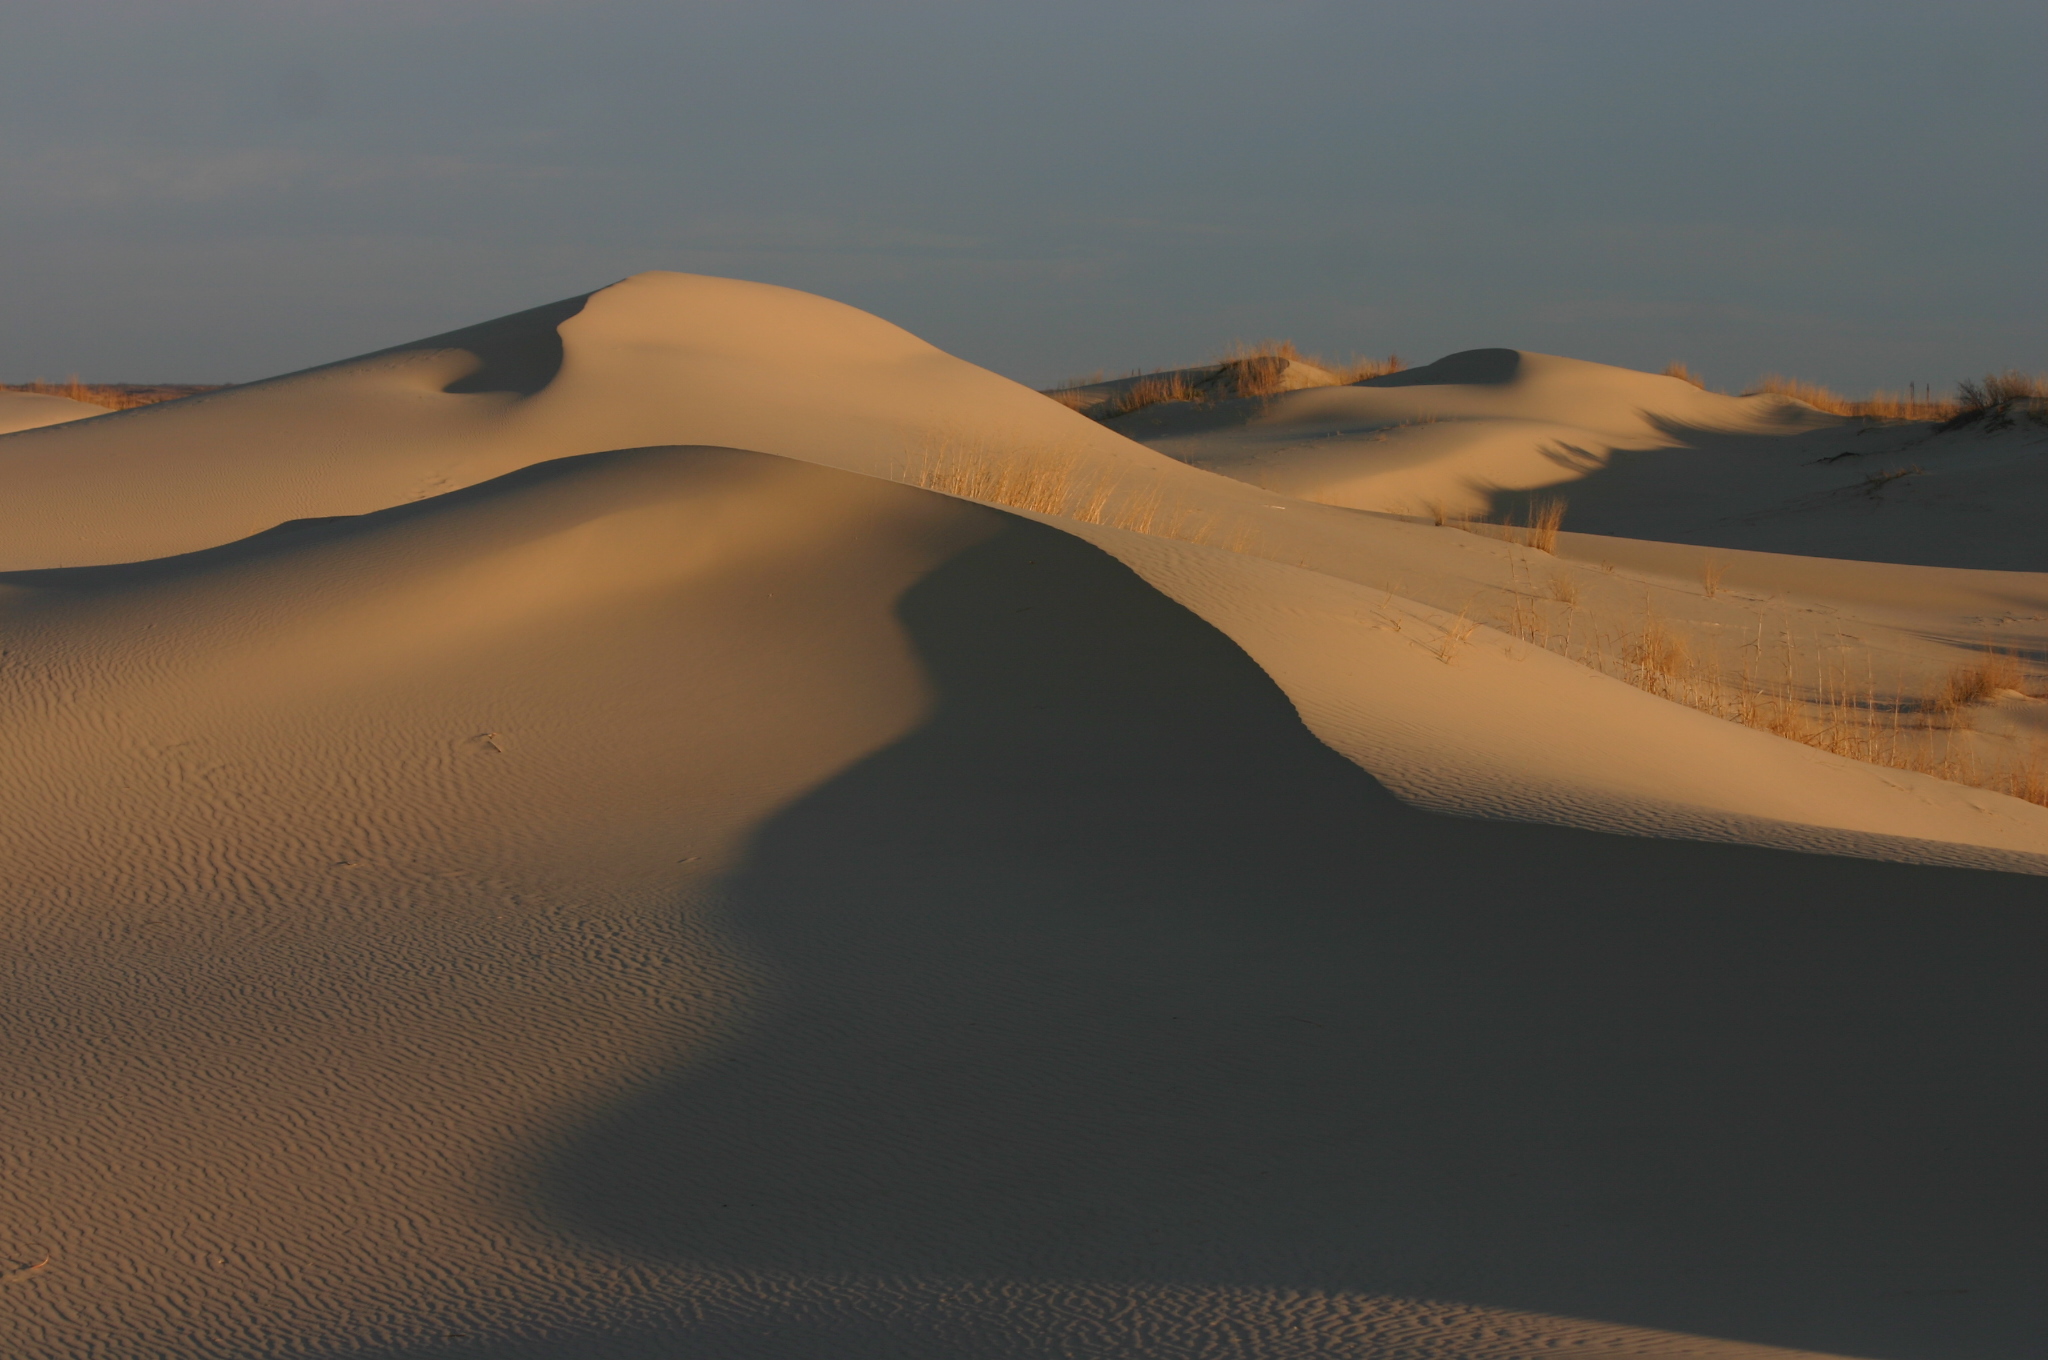 Sand dunes with long shadows cast by the setting sun. Sparse vegetation is visible in some areas.